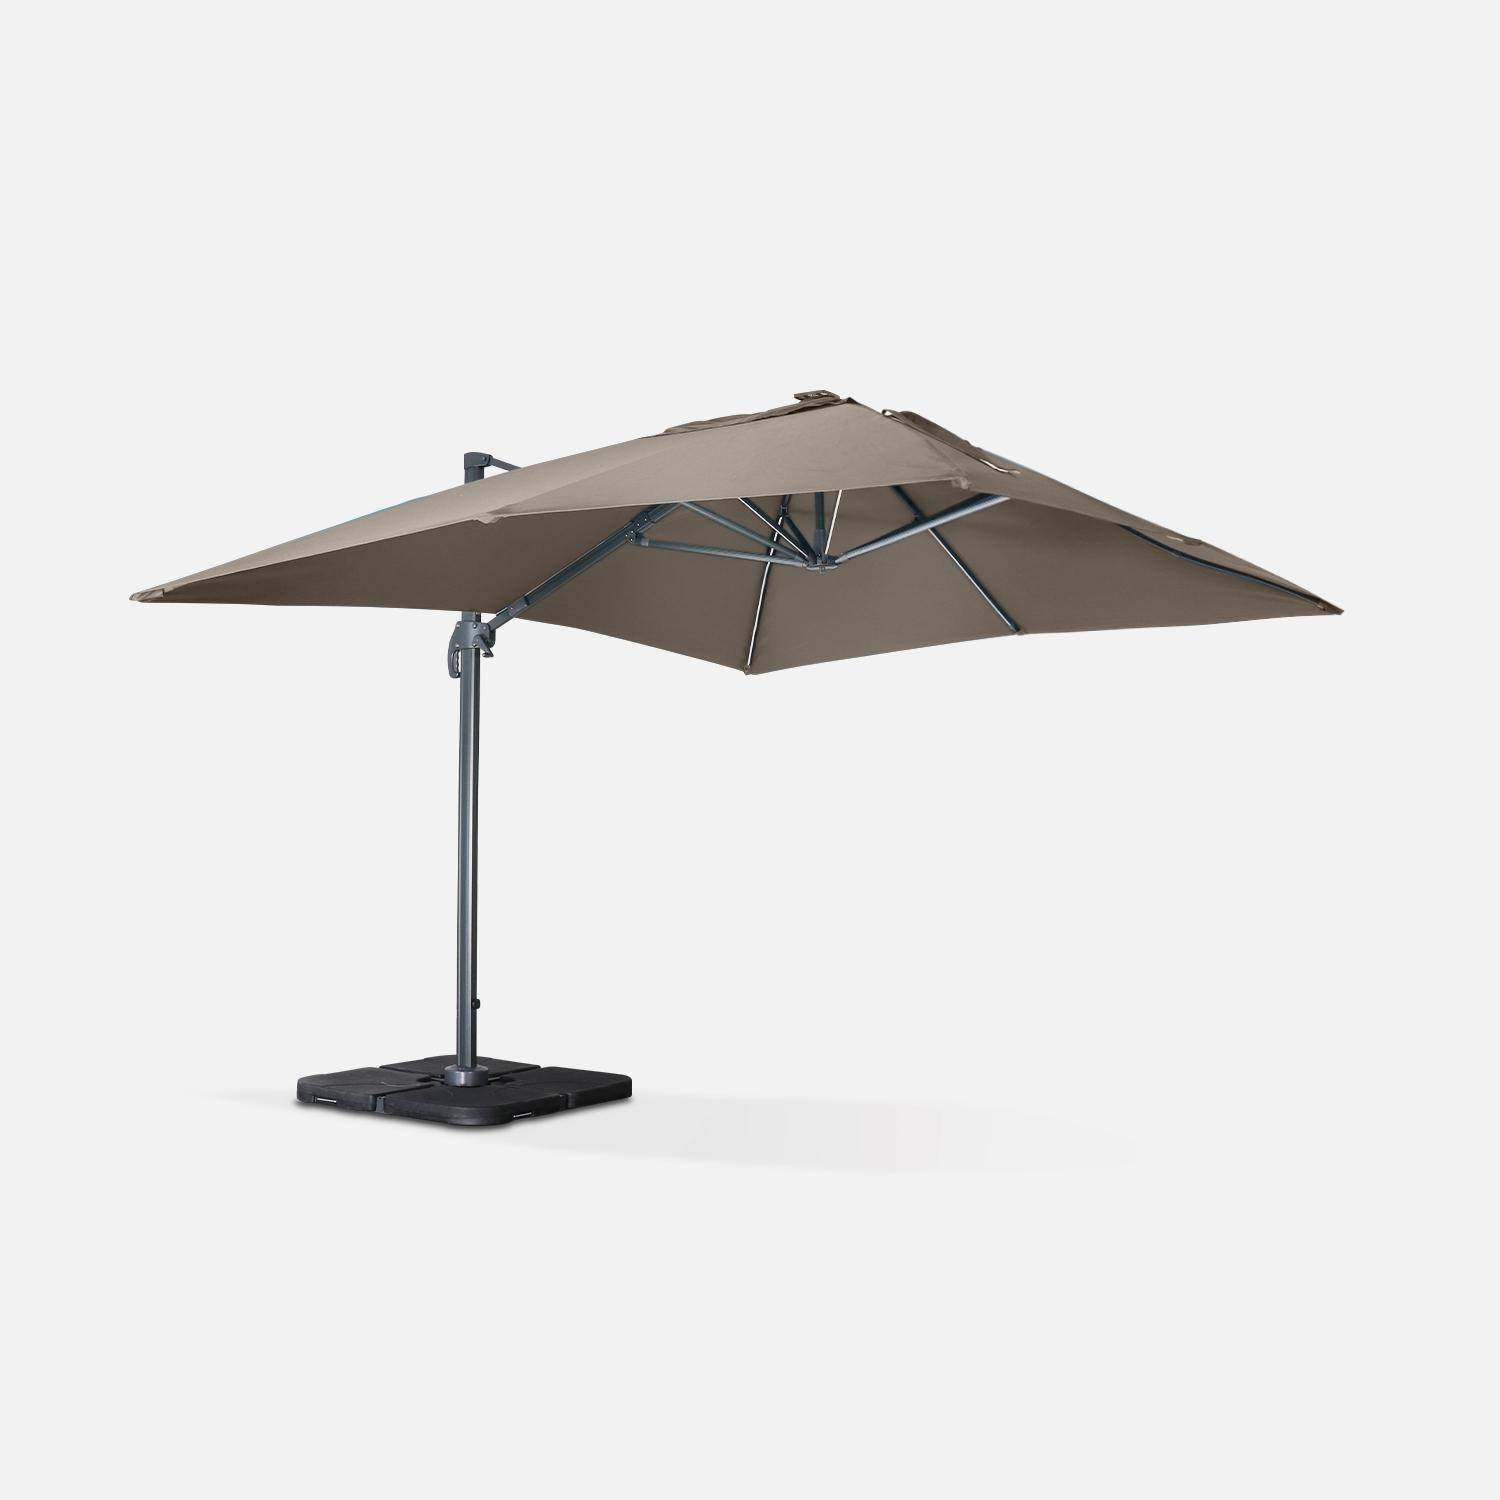 Premium quality rectangular 3x4m cantilever parasol with solar-powered integrated LED lights, tiltable, foldable , 360° rotation, cover included, beige Photo2